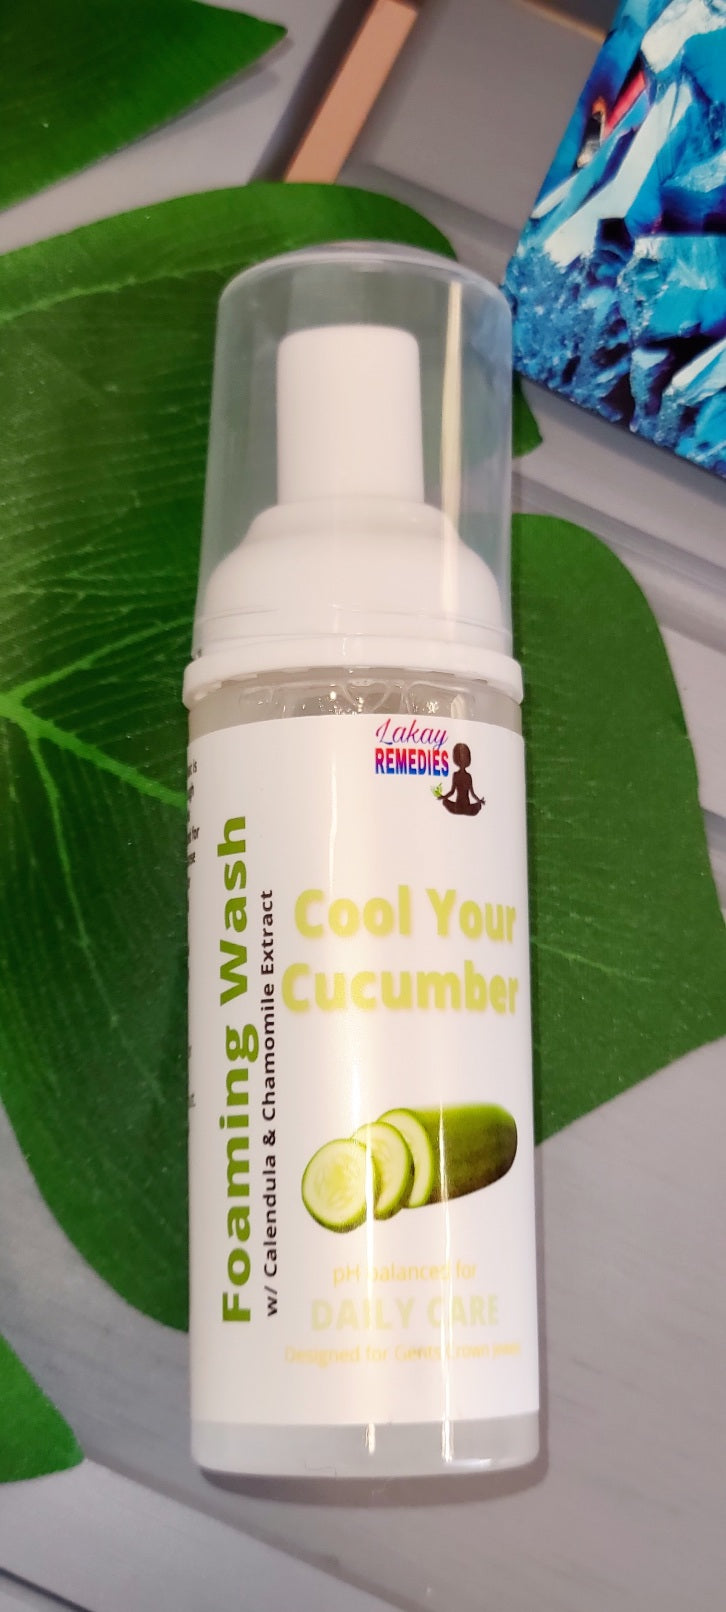 Cool Your Cucumber Men Intimate Daily Foam Wash